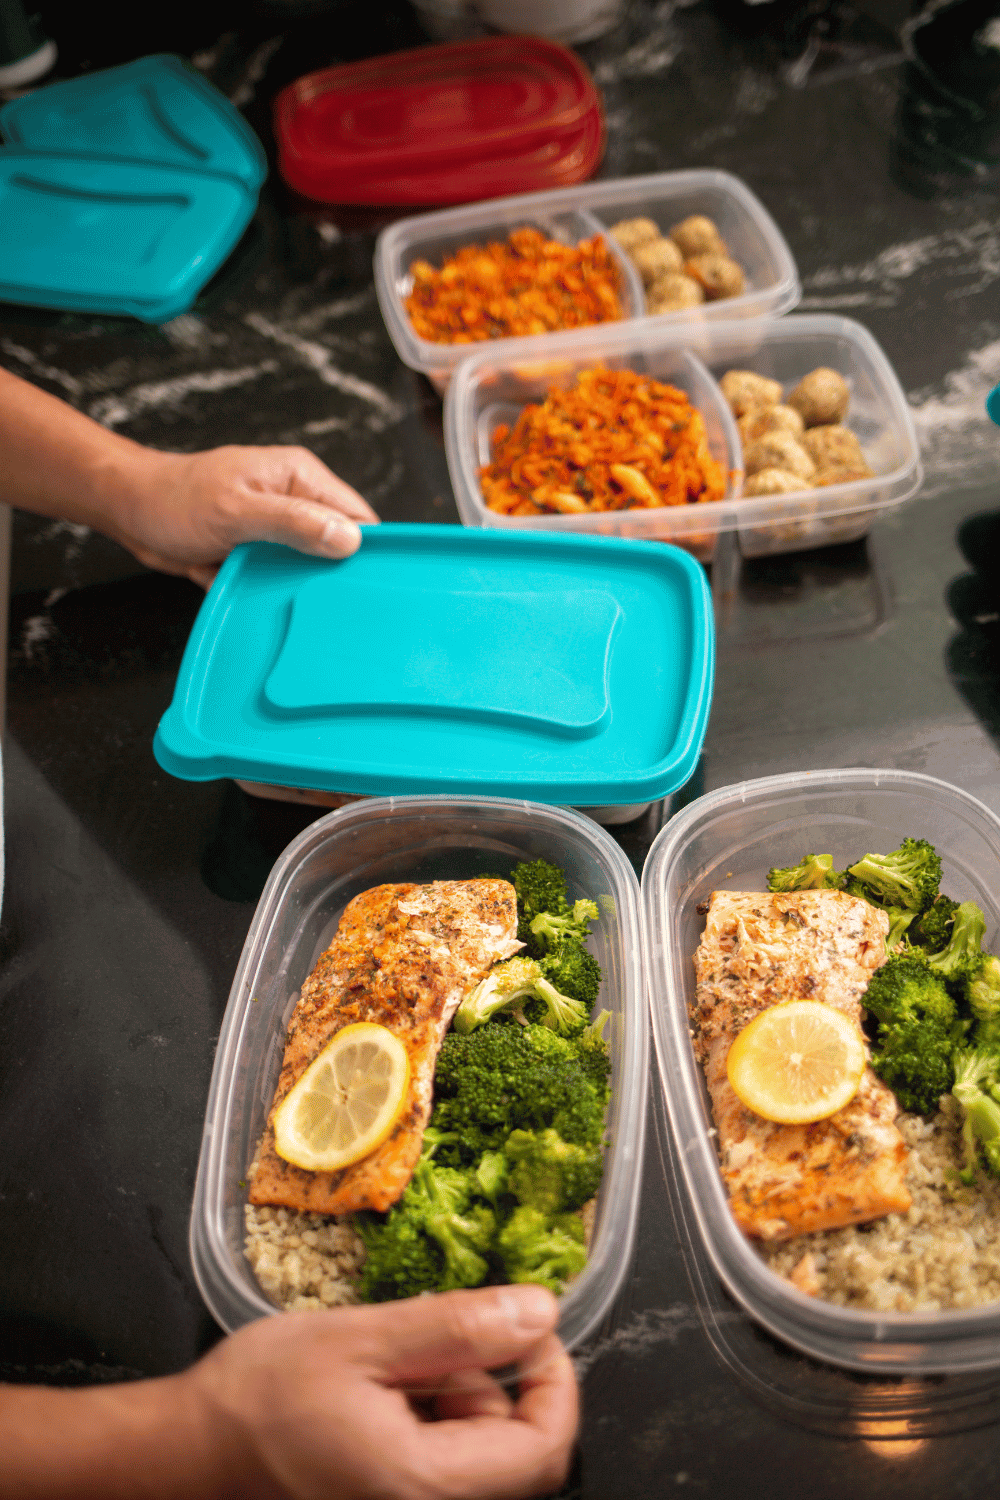 healthy camping meals in containers to preserve freshness.